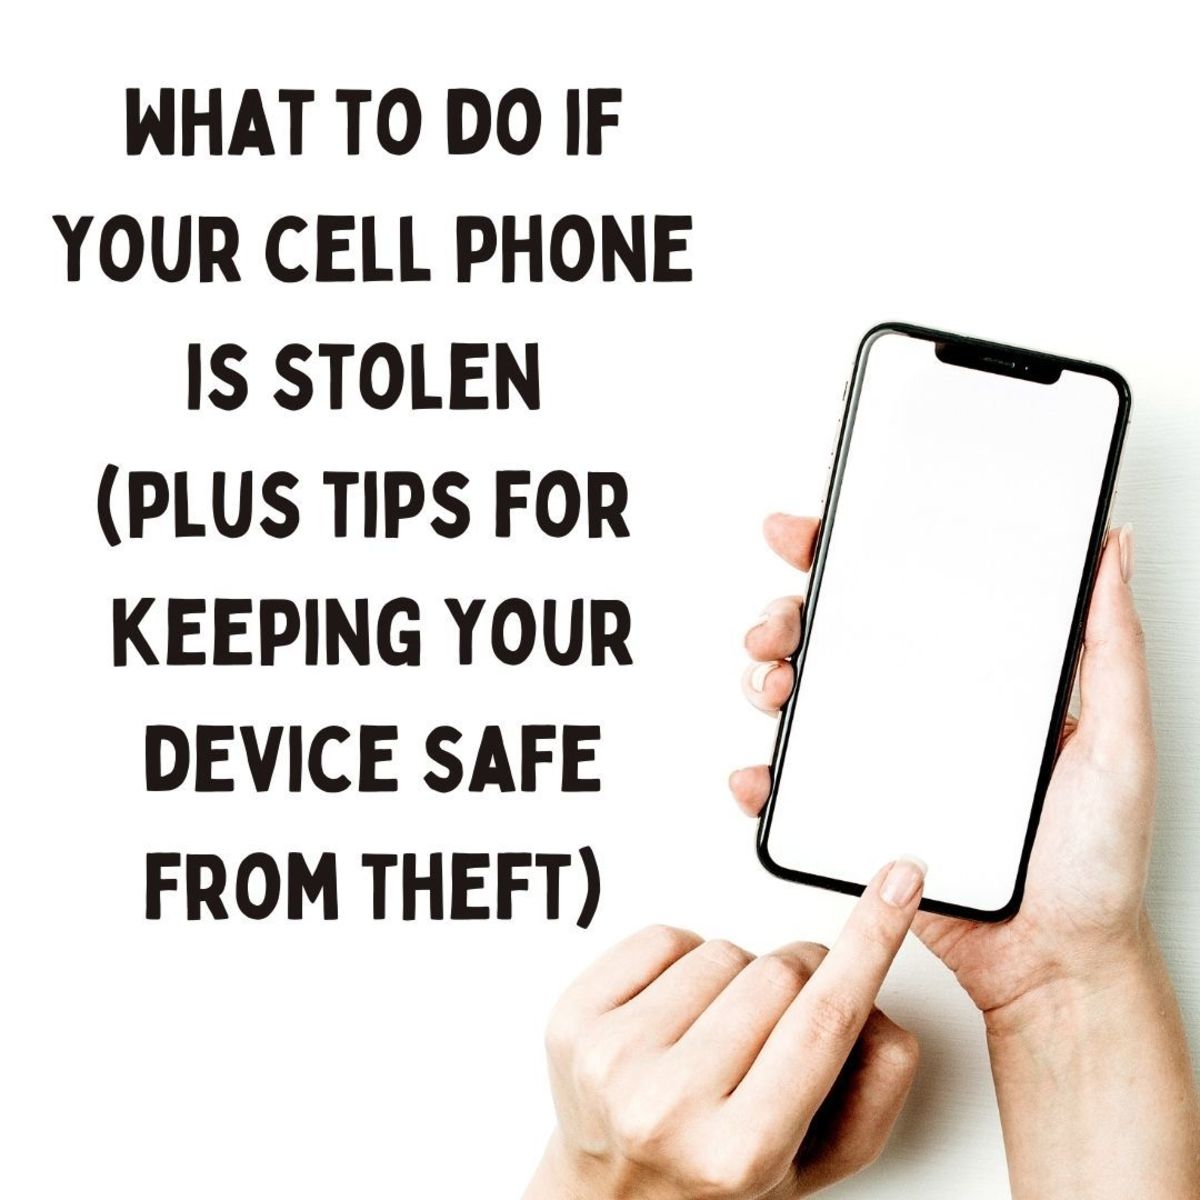 What to do if your phone is stolen and how to combat theft